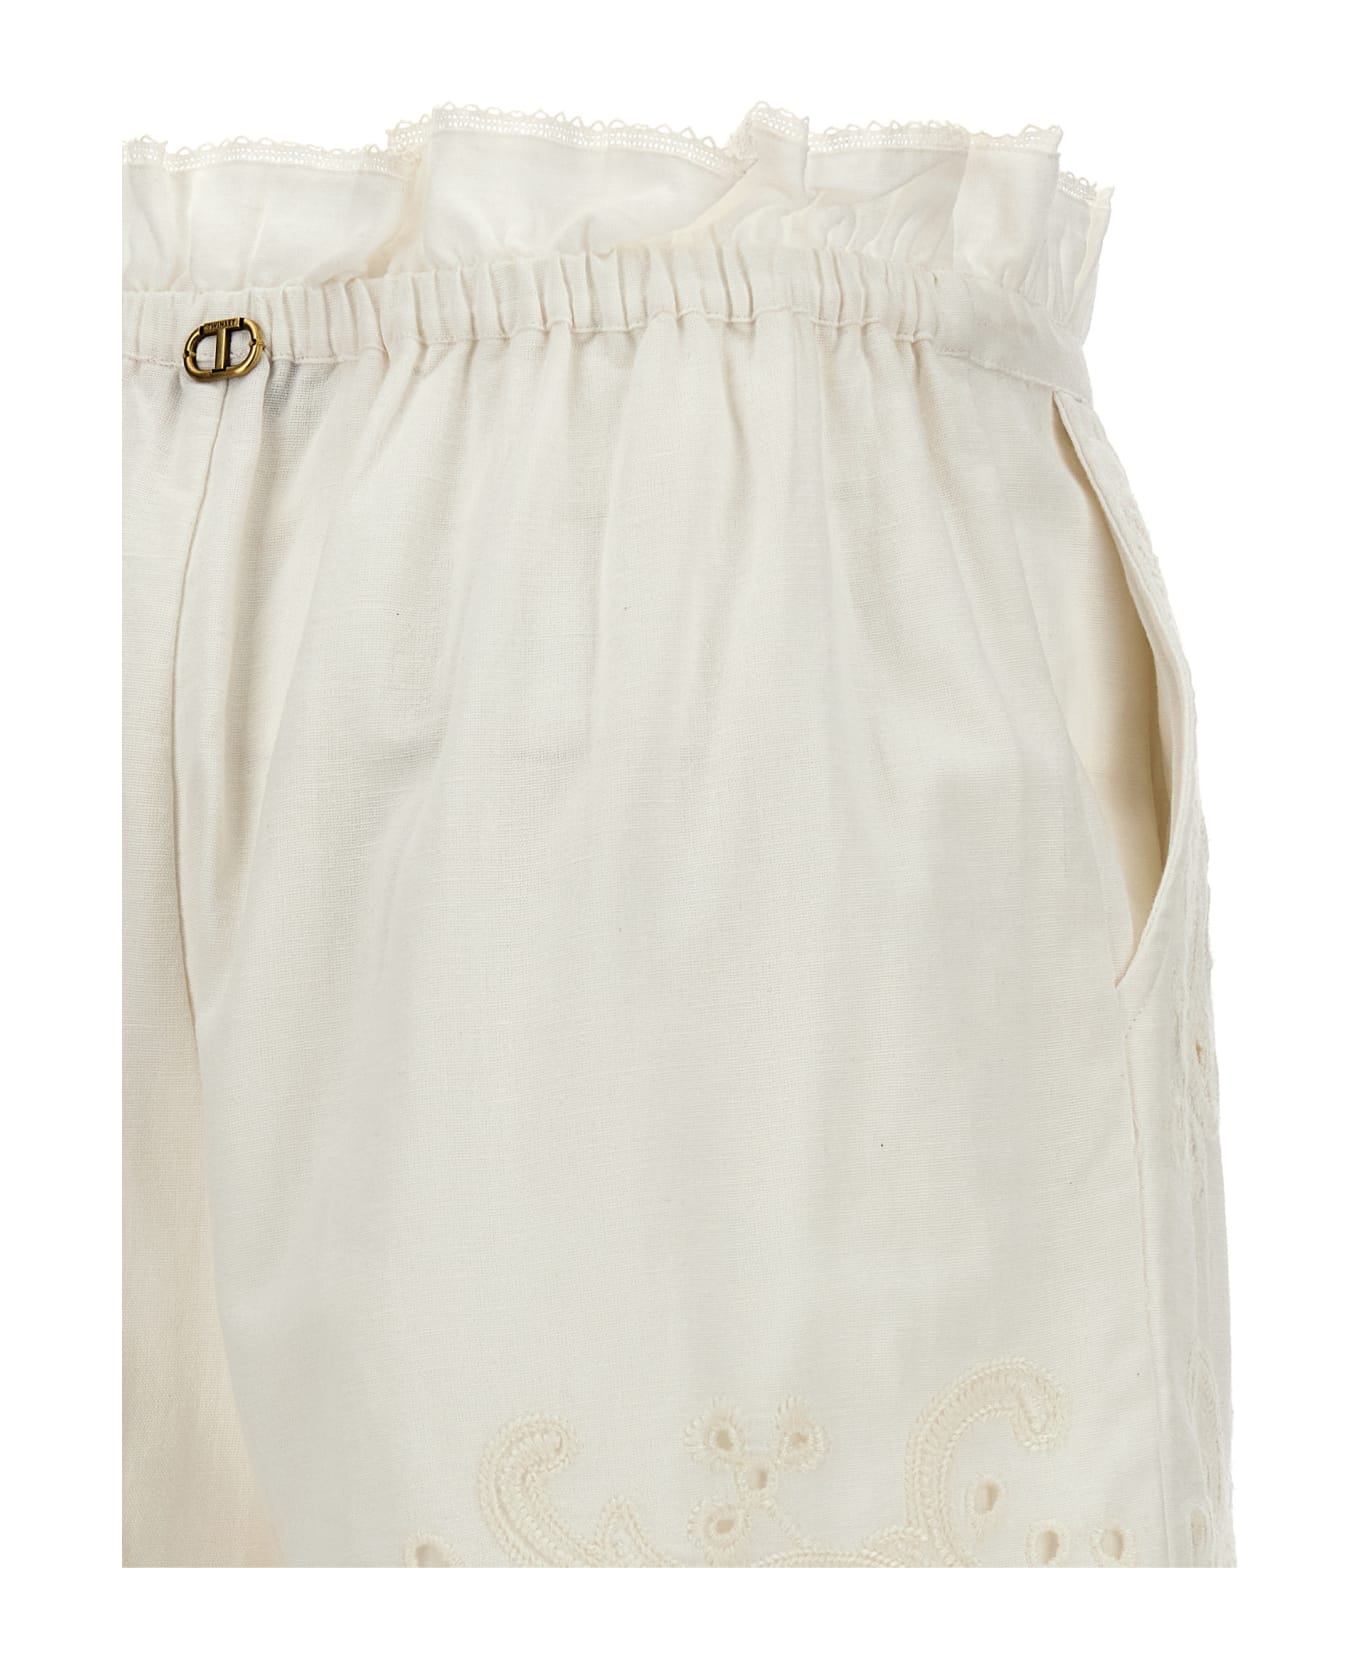 TwinSet Embroidery Shorts - White